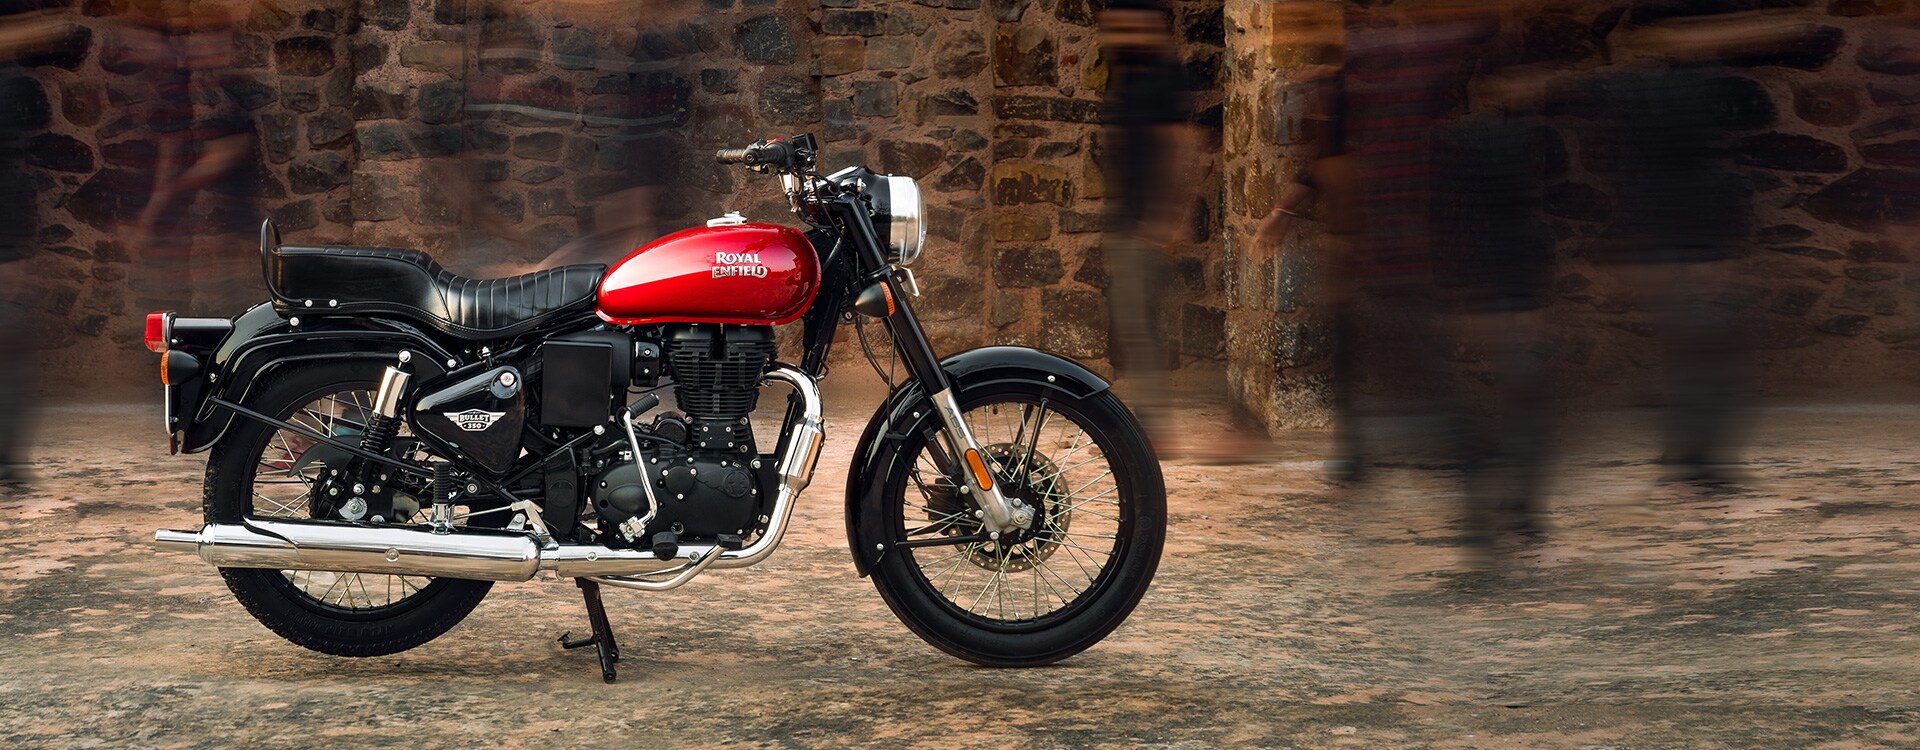 Bullet 350 Es Colours Specifications Reviews Gallery Royal Enfield